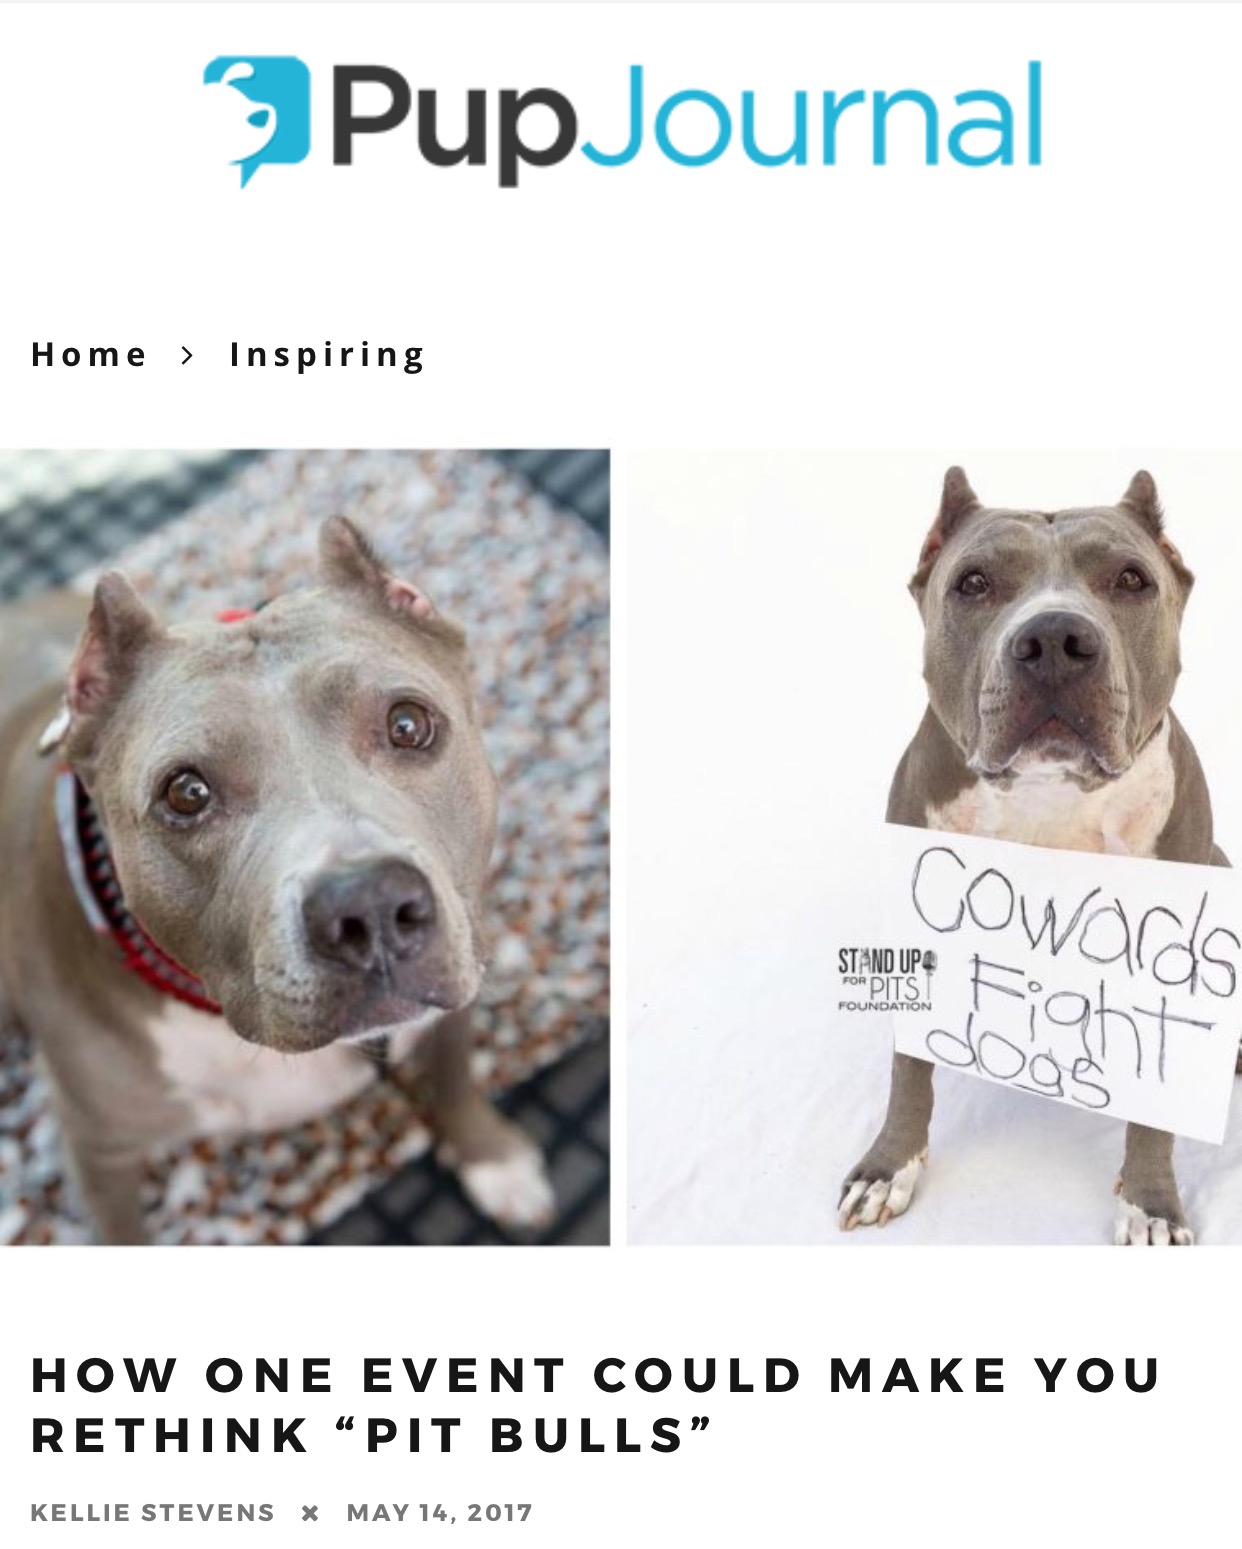 Stand Up For Pits is magic